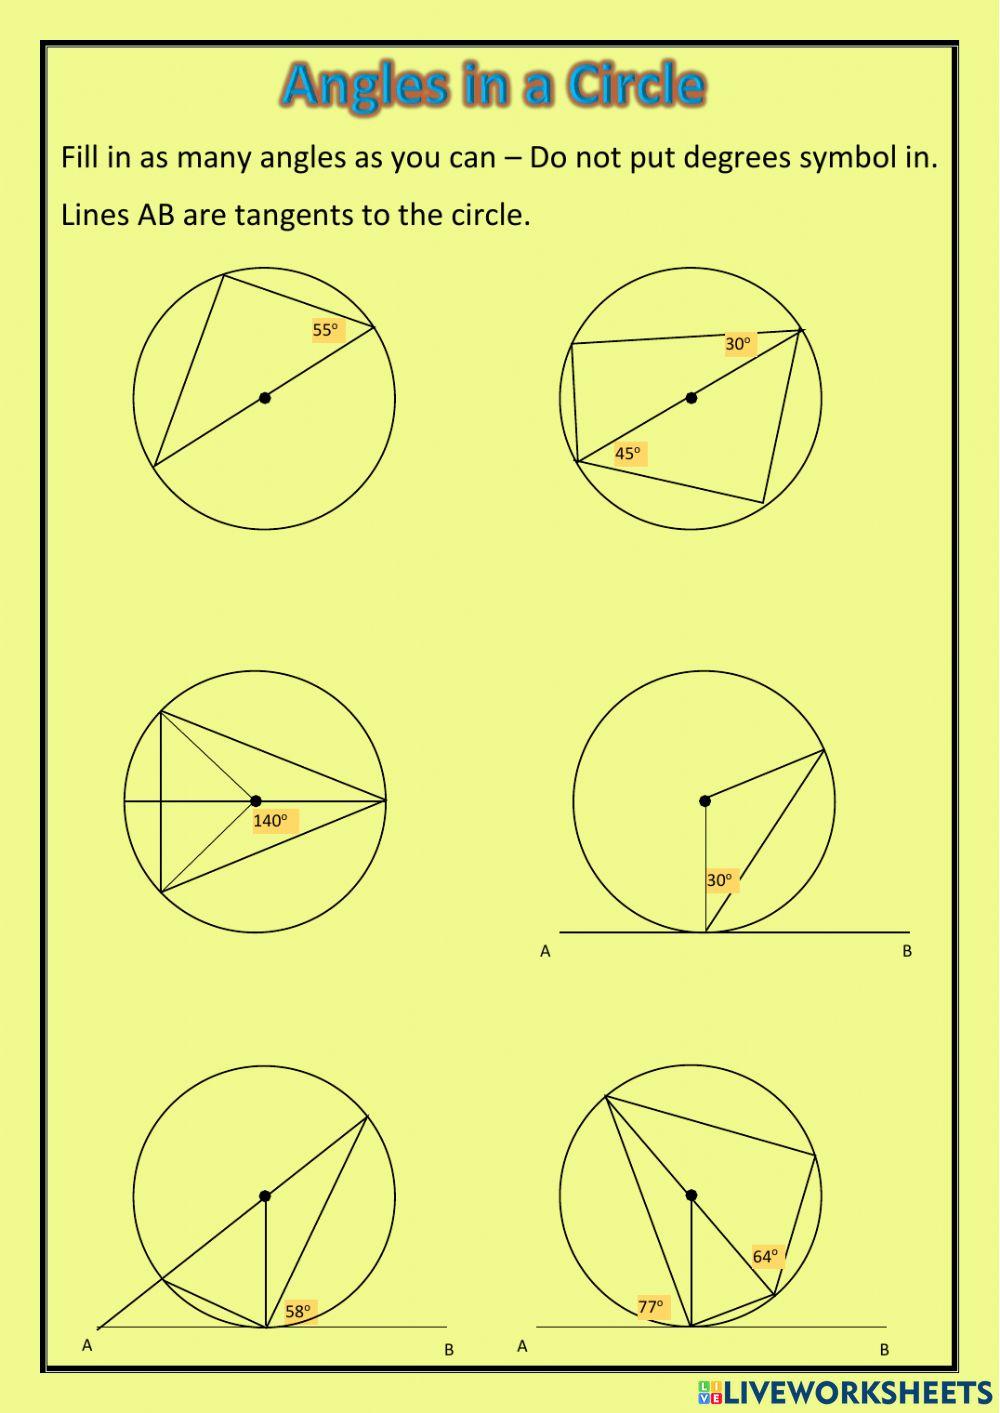 National 5 - Angles in a Circle